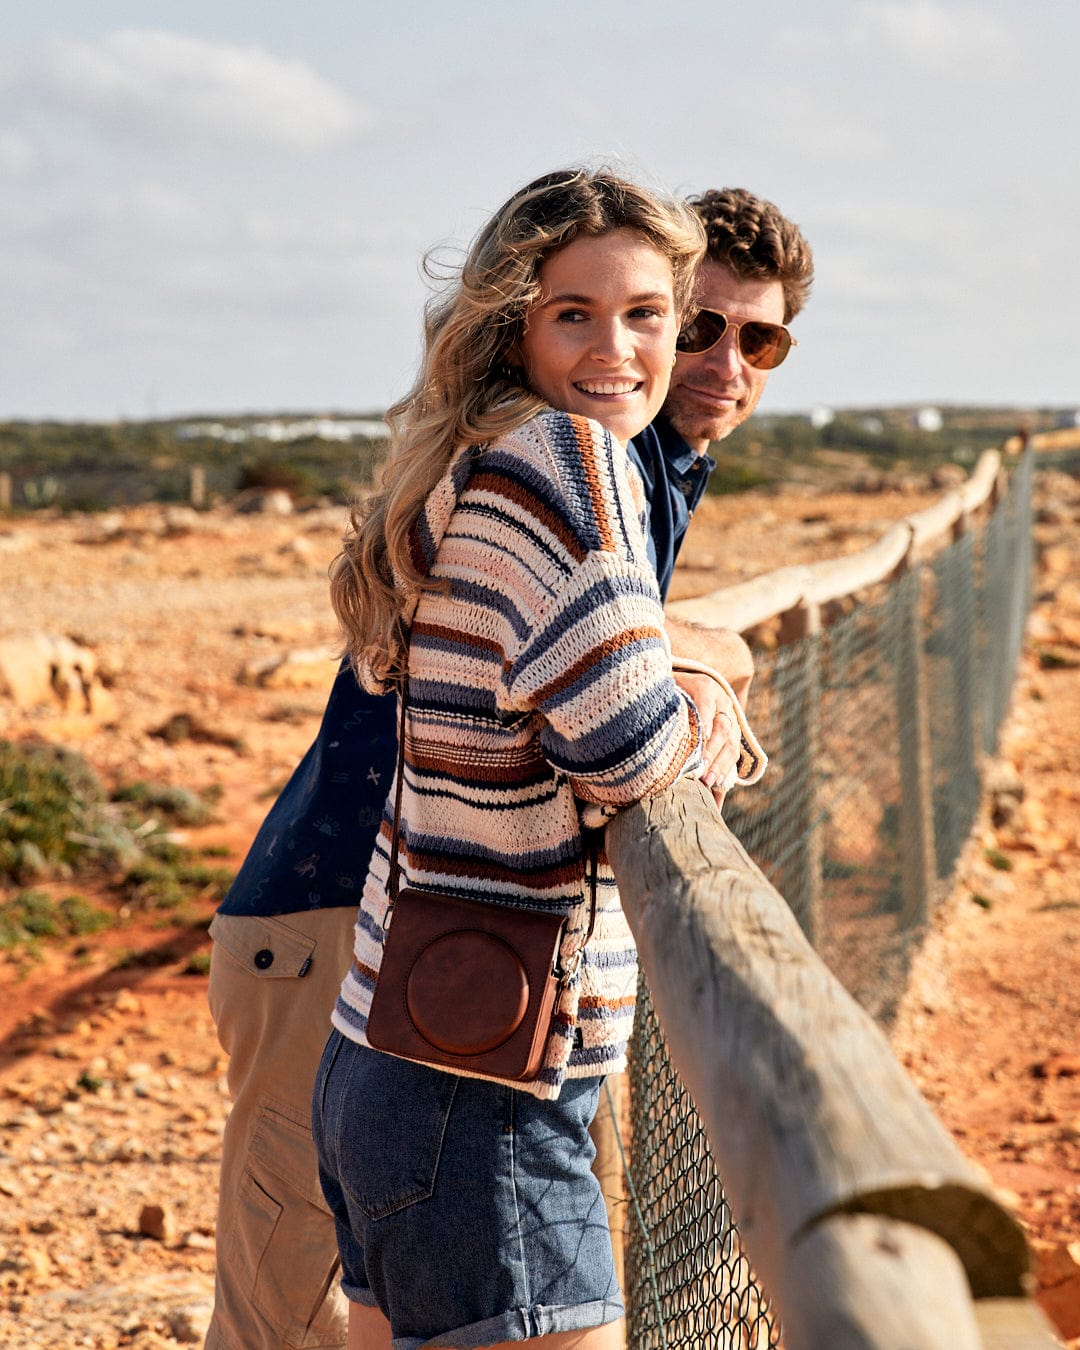 A man and woman leaning against a fence in the desert, with draw cords, wearing Saltrock's Aubrey Pop - Womens Hooded Crochet Knit in Cream.